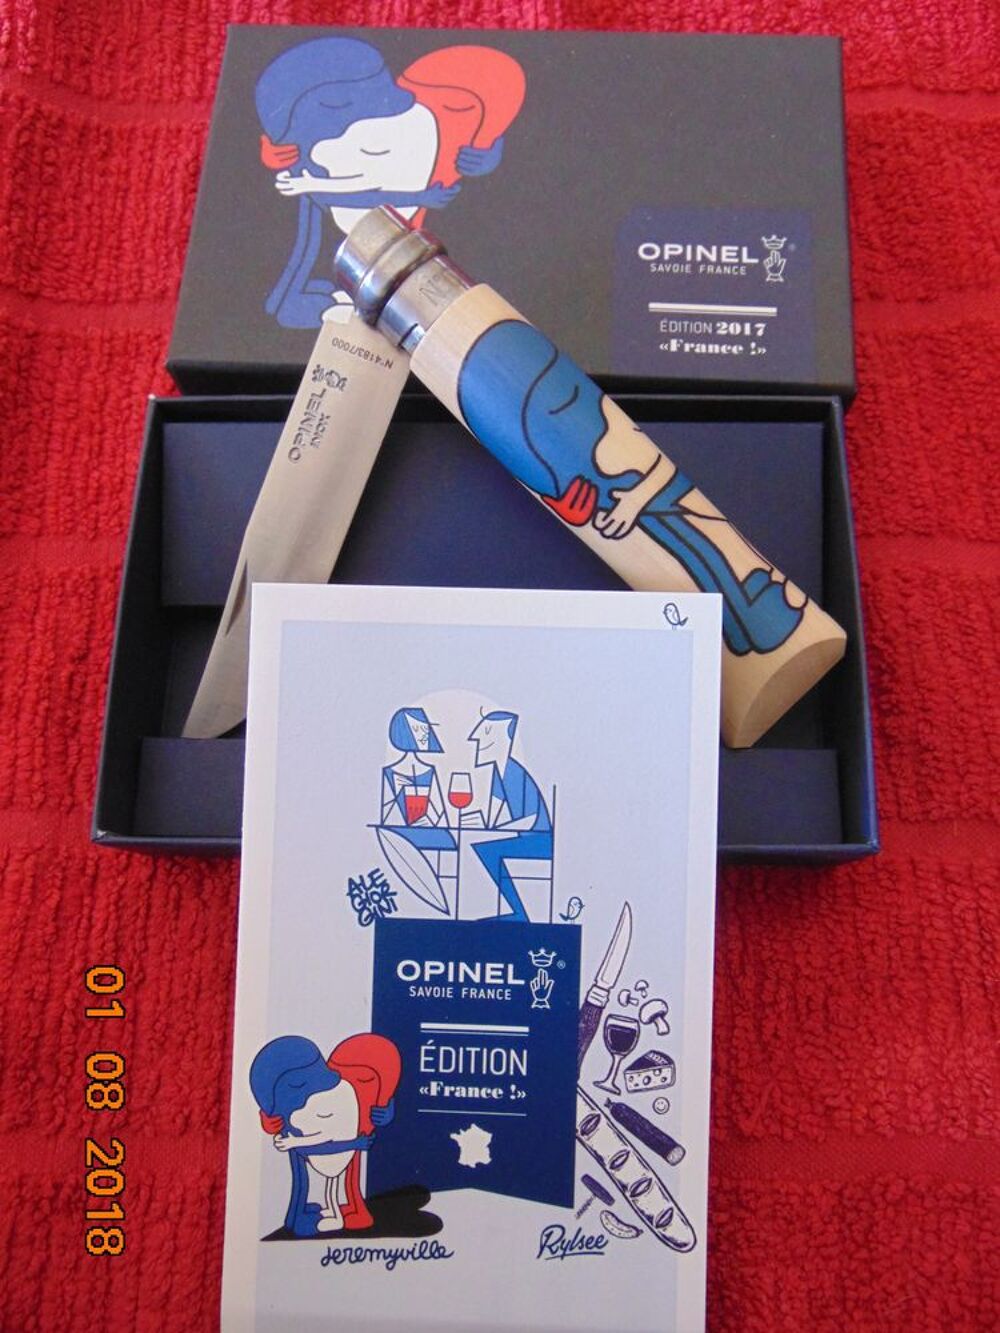 couteau Opinel Dcoration